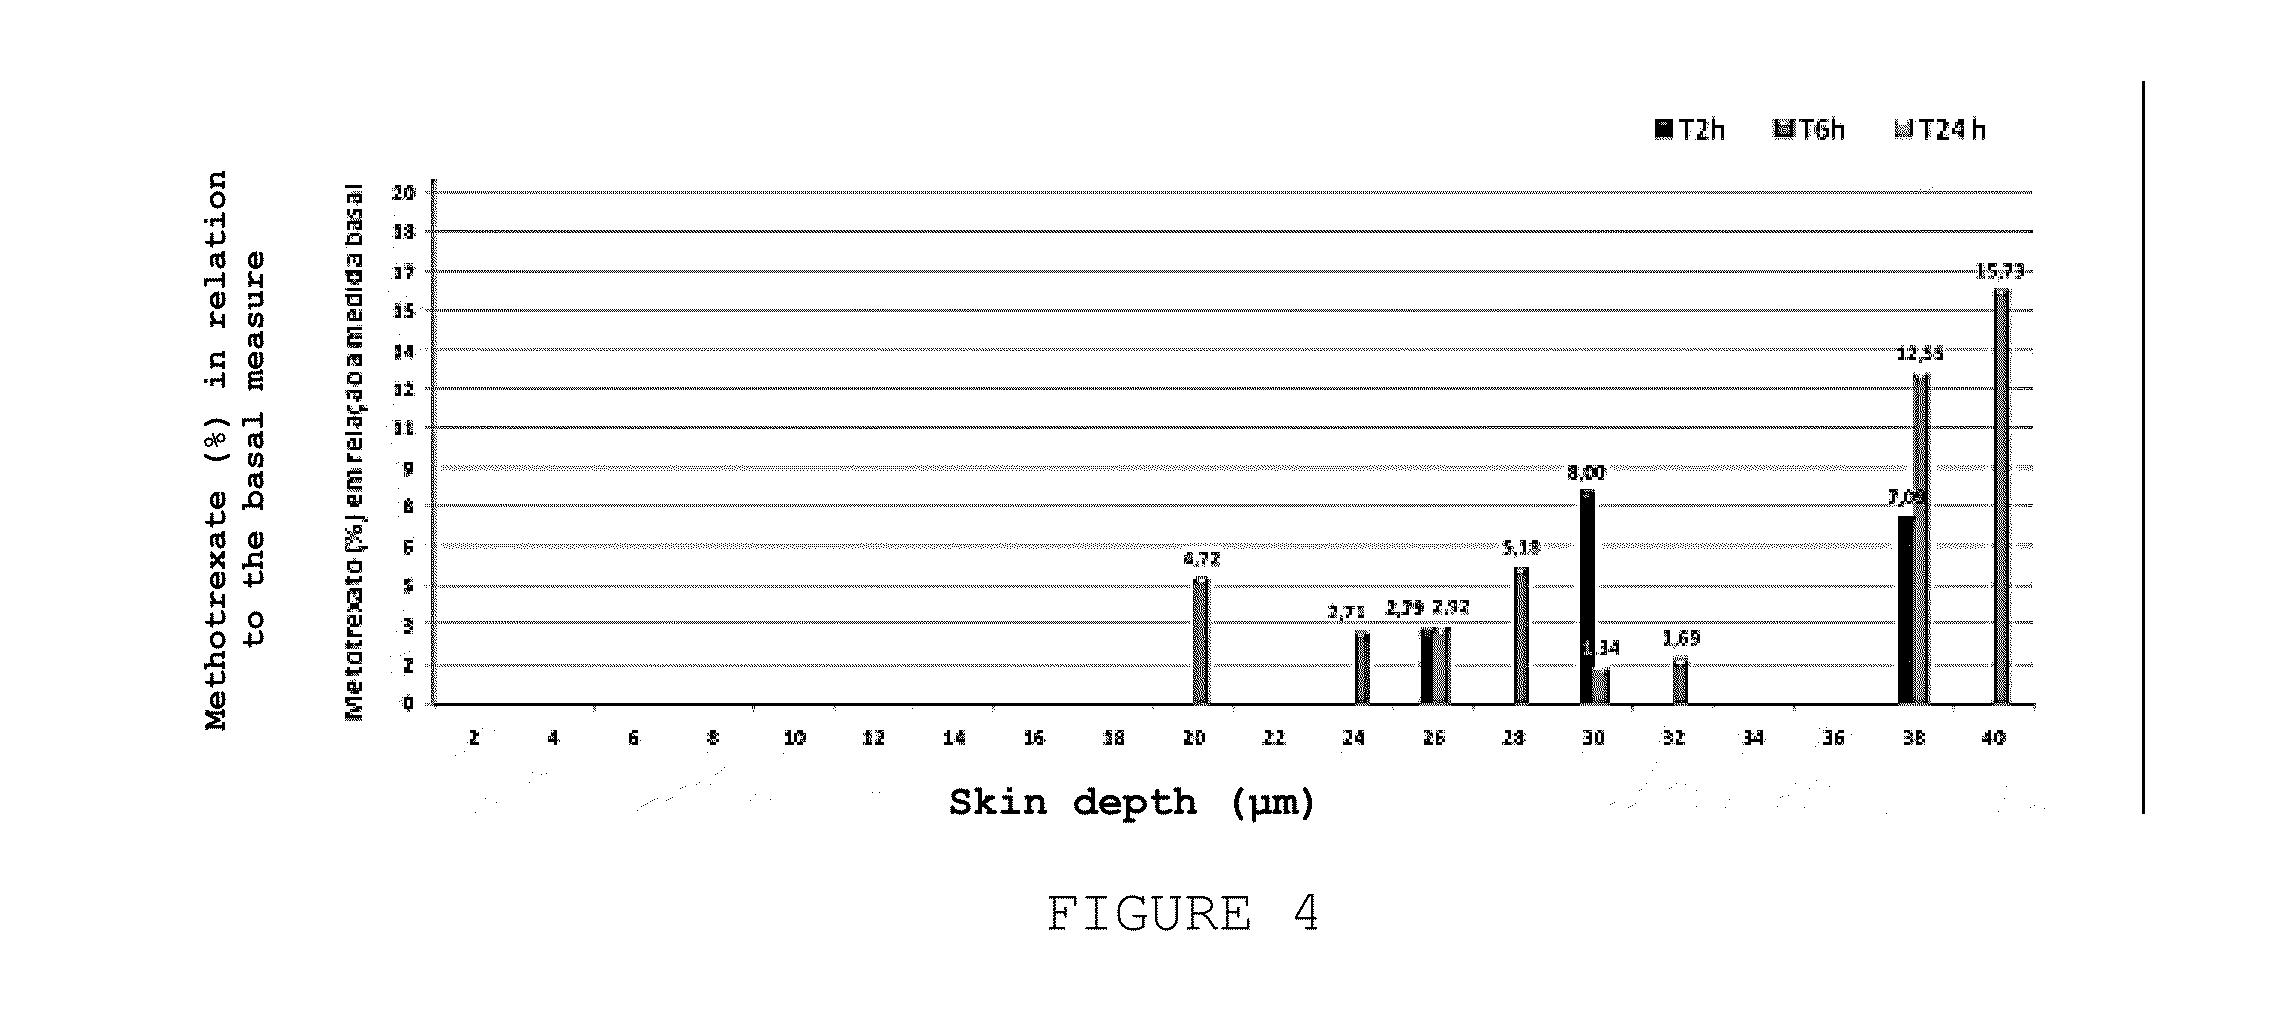 Topical Pharmaceutical Composition, Method for Producing the Topical Pharmaceutical Composition, Use of the Topical Pharmaceutical Composition and Method for the Topical Treatment of Psoriasis, Atopic Dermatitis or Chronic Eczema